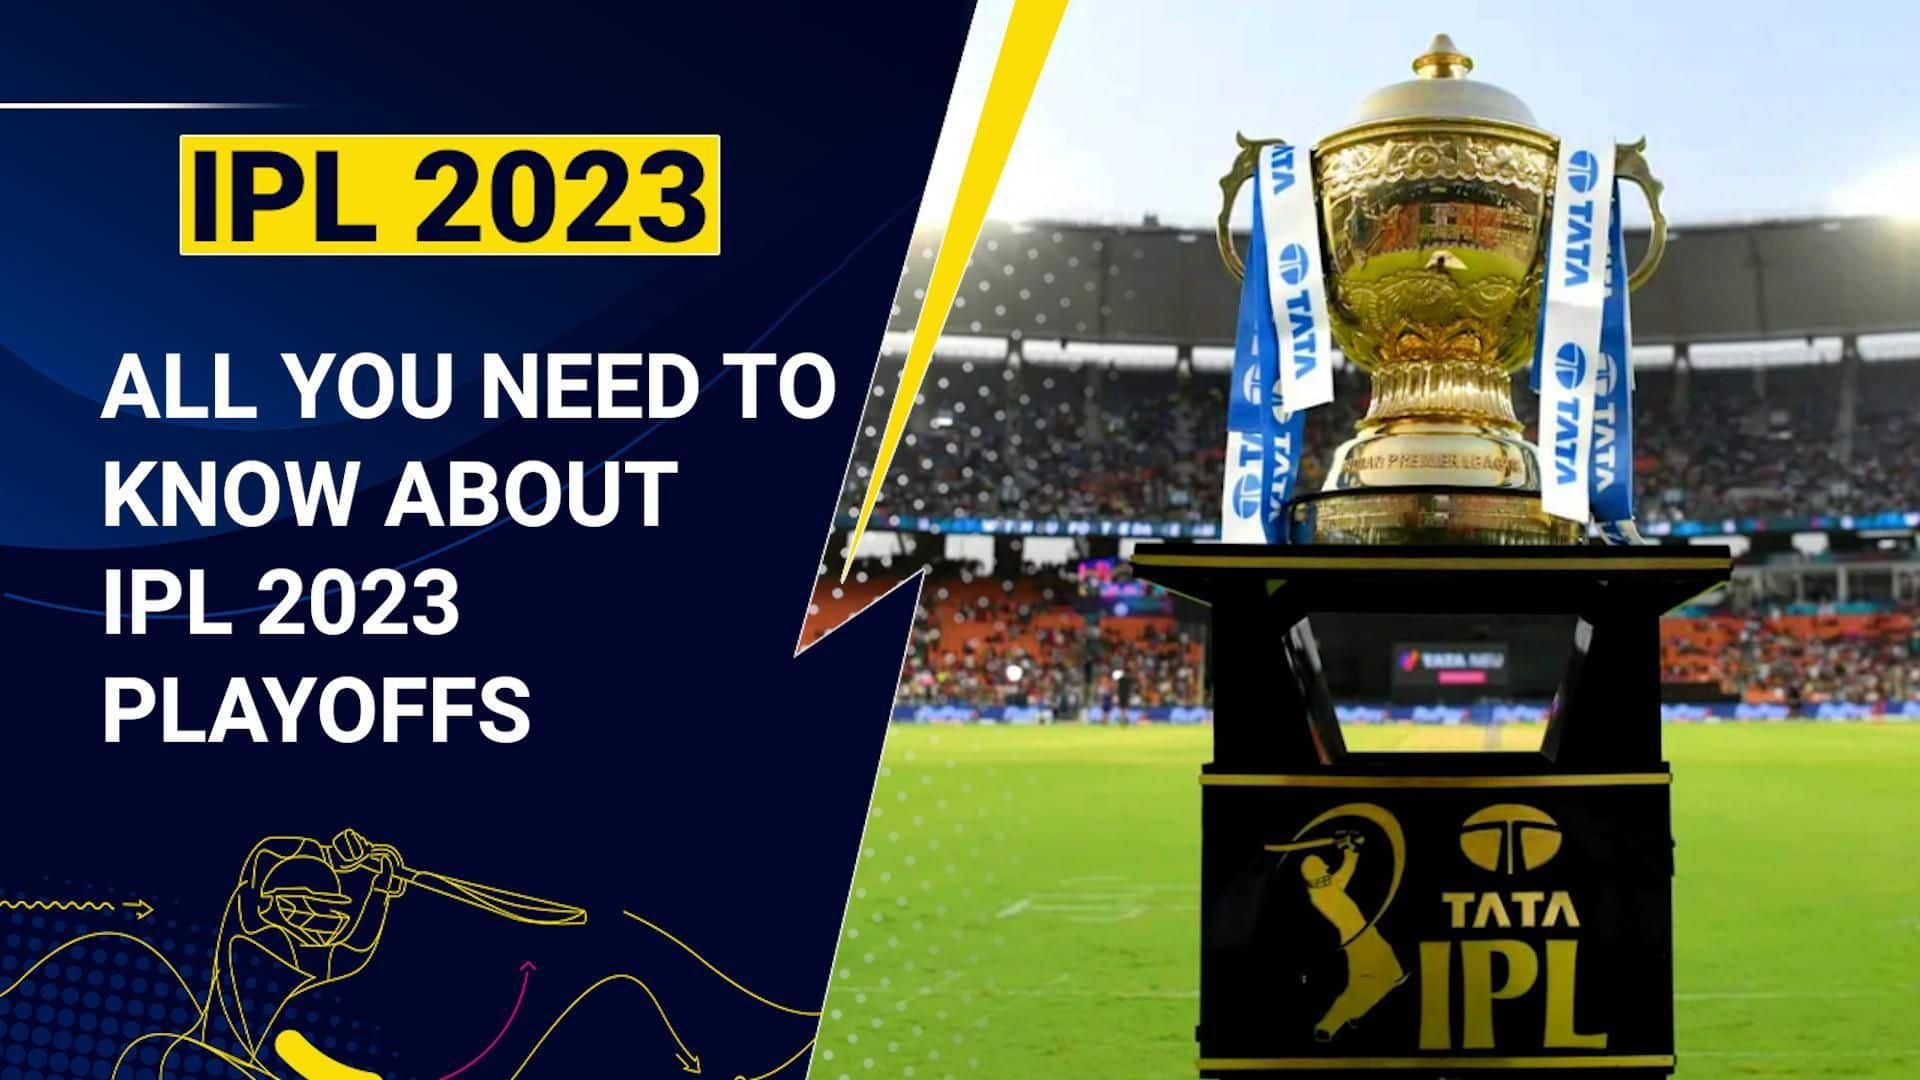 IPL 2023 Playoffs: From Venues To Timings; All You Need To Know About IPL 2023 Playoffs Schedule